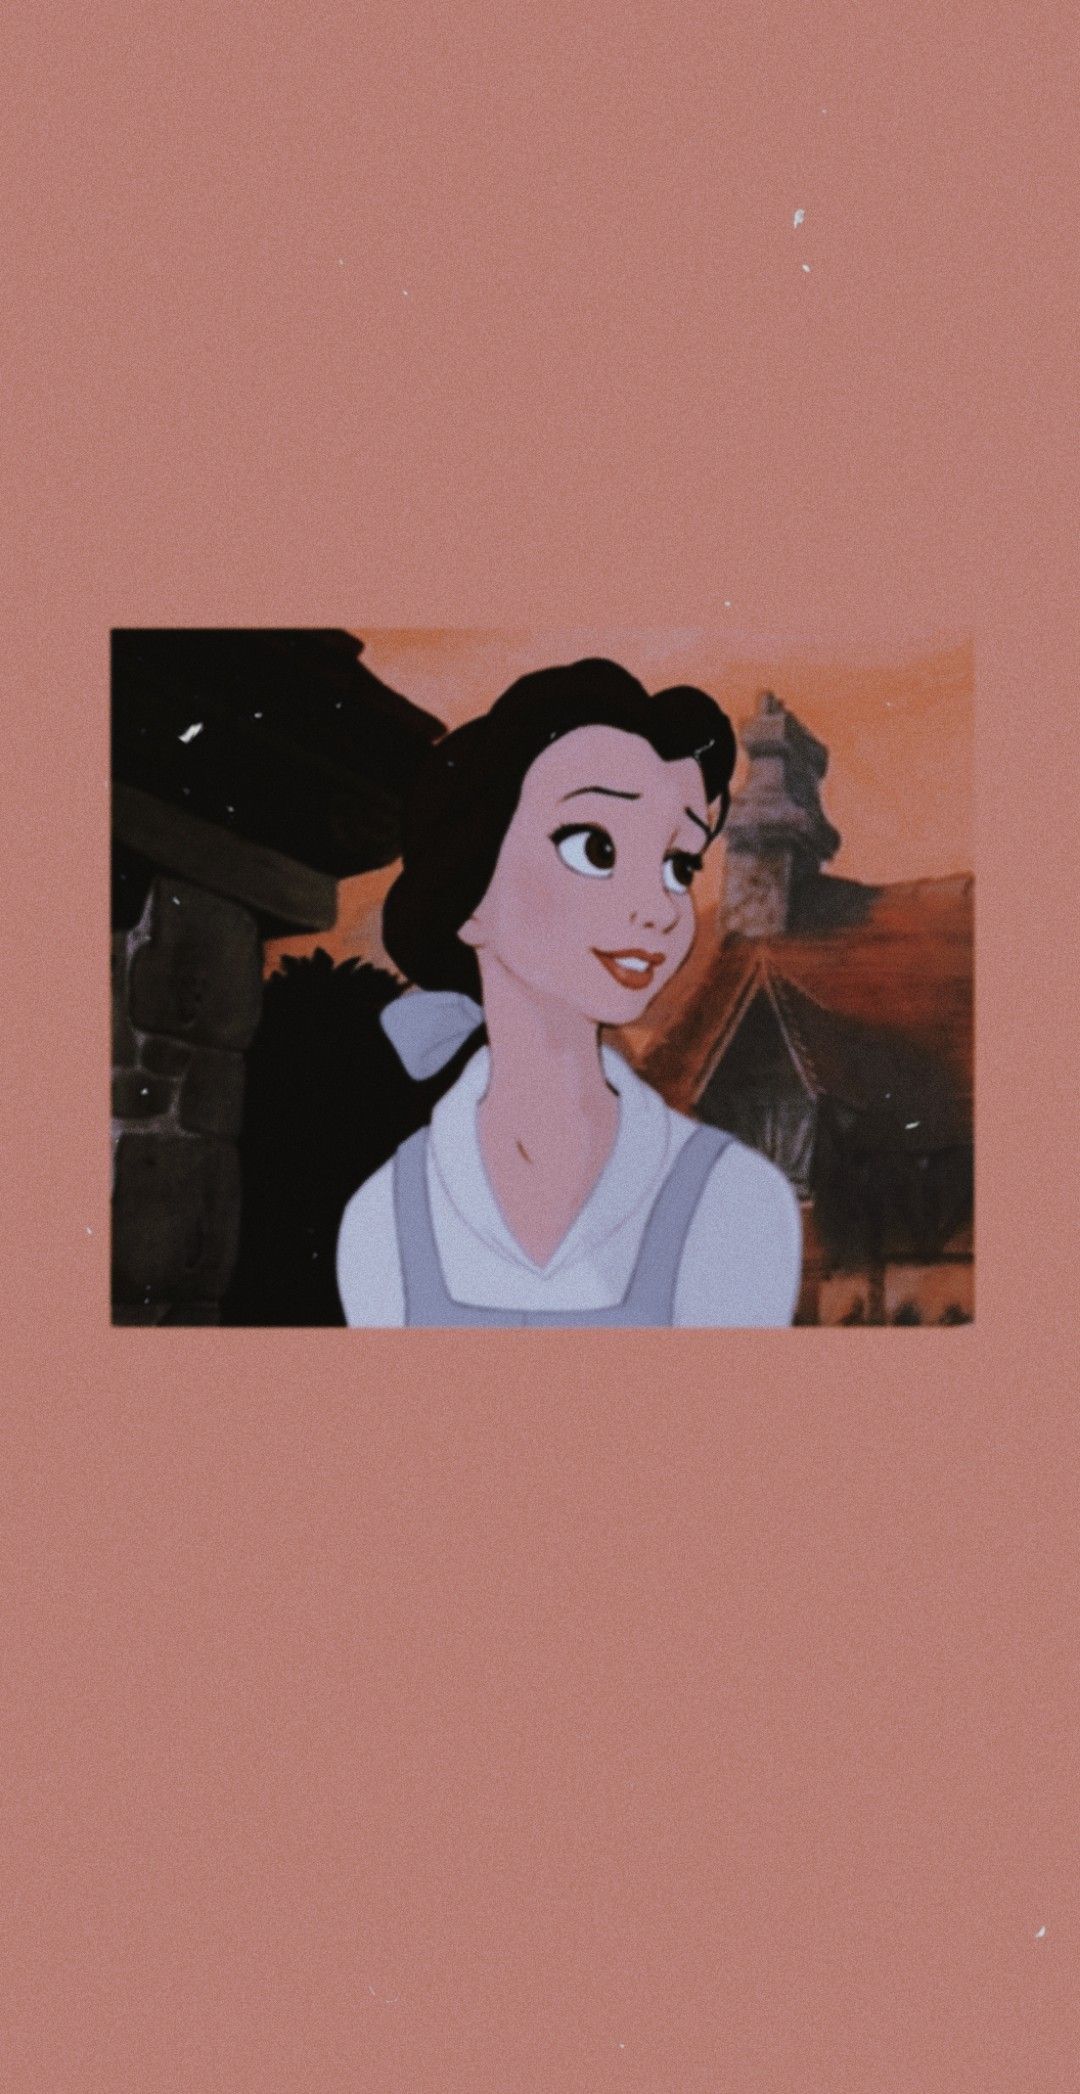 A cartoon of belle from beauty and the beast - Disney, Belle